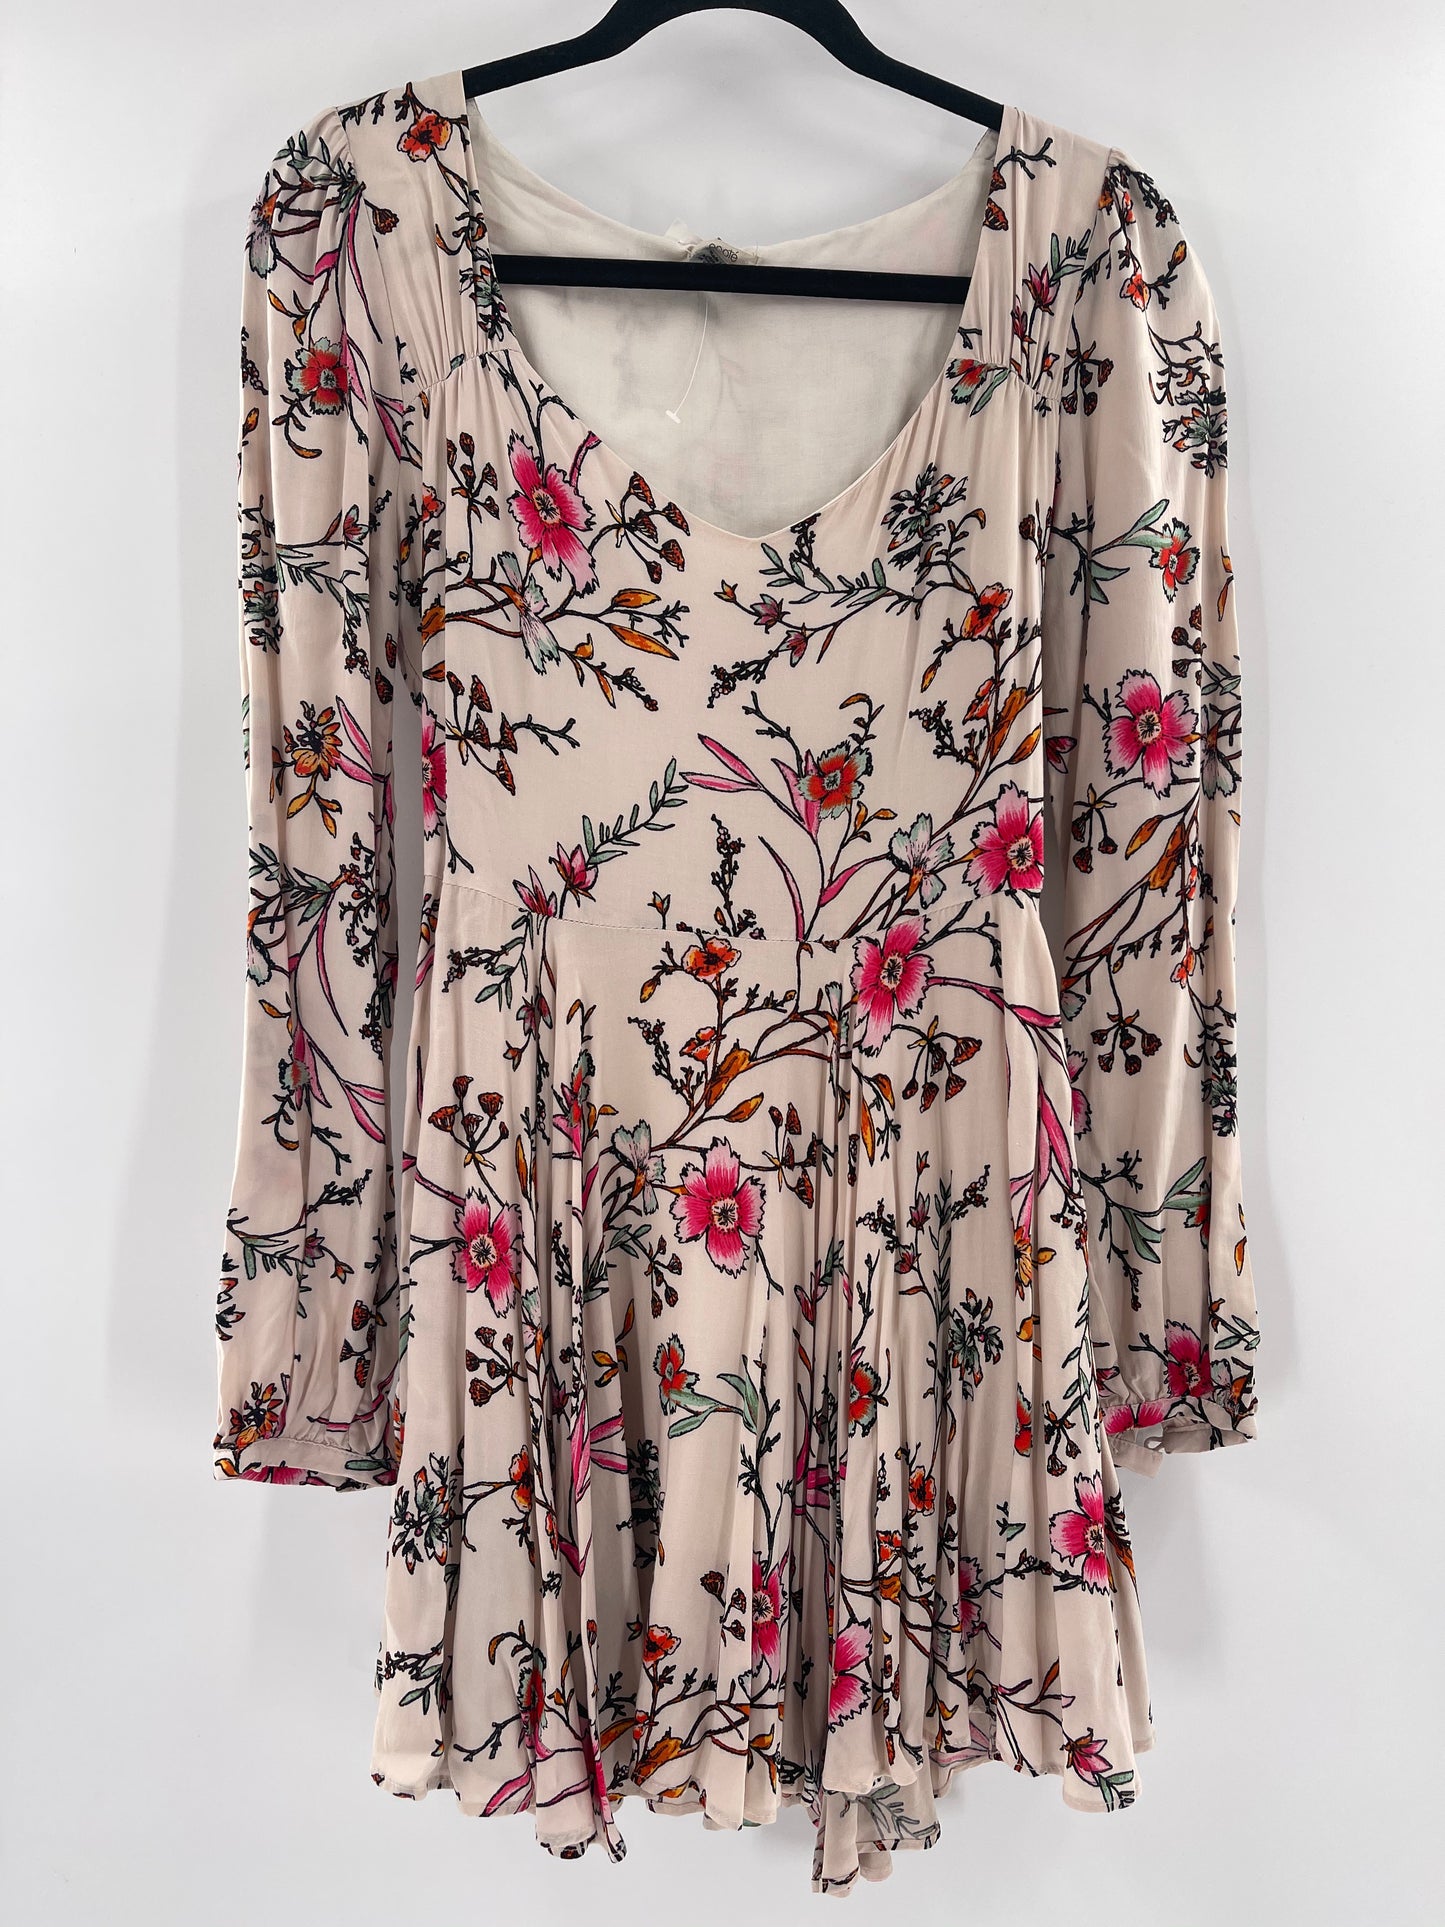 Urban Outfitters- Ecote White Floral Flare Skater Long Sleeve Mini Dress (Size 2)